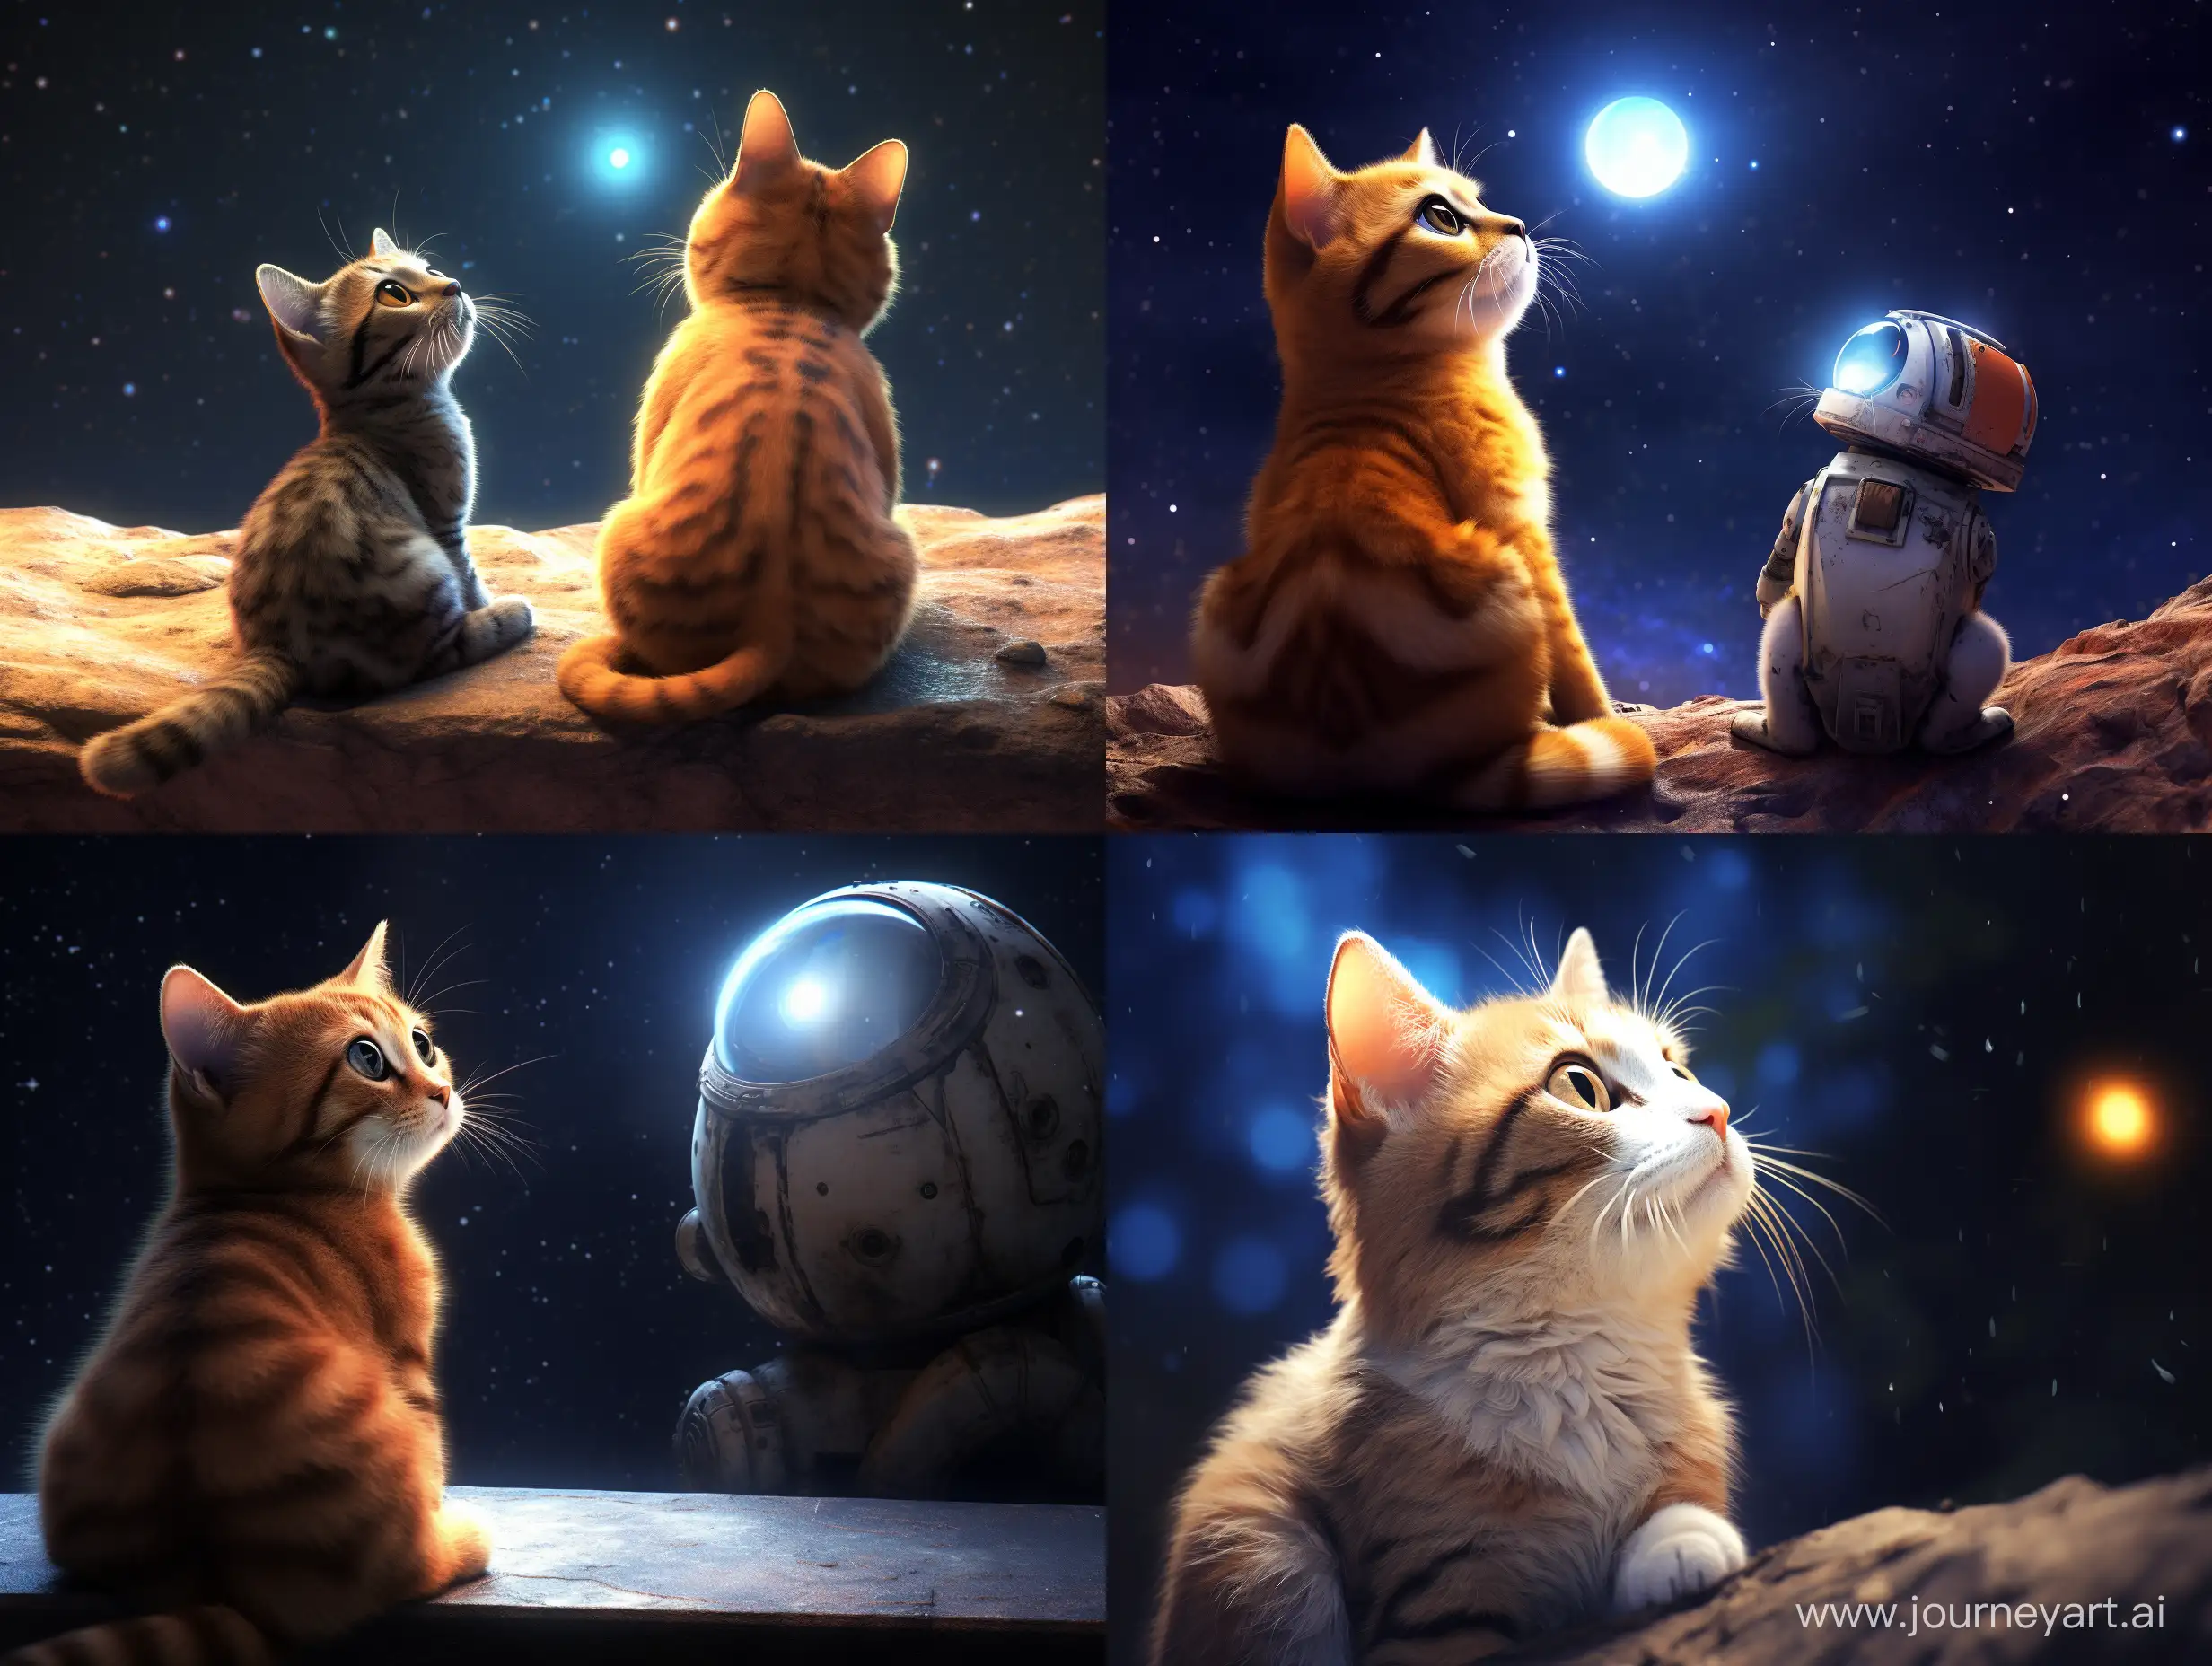 WallE-and-Cute-Cat-Contemplating-Under-Starry-Skies